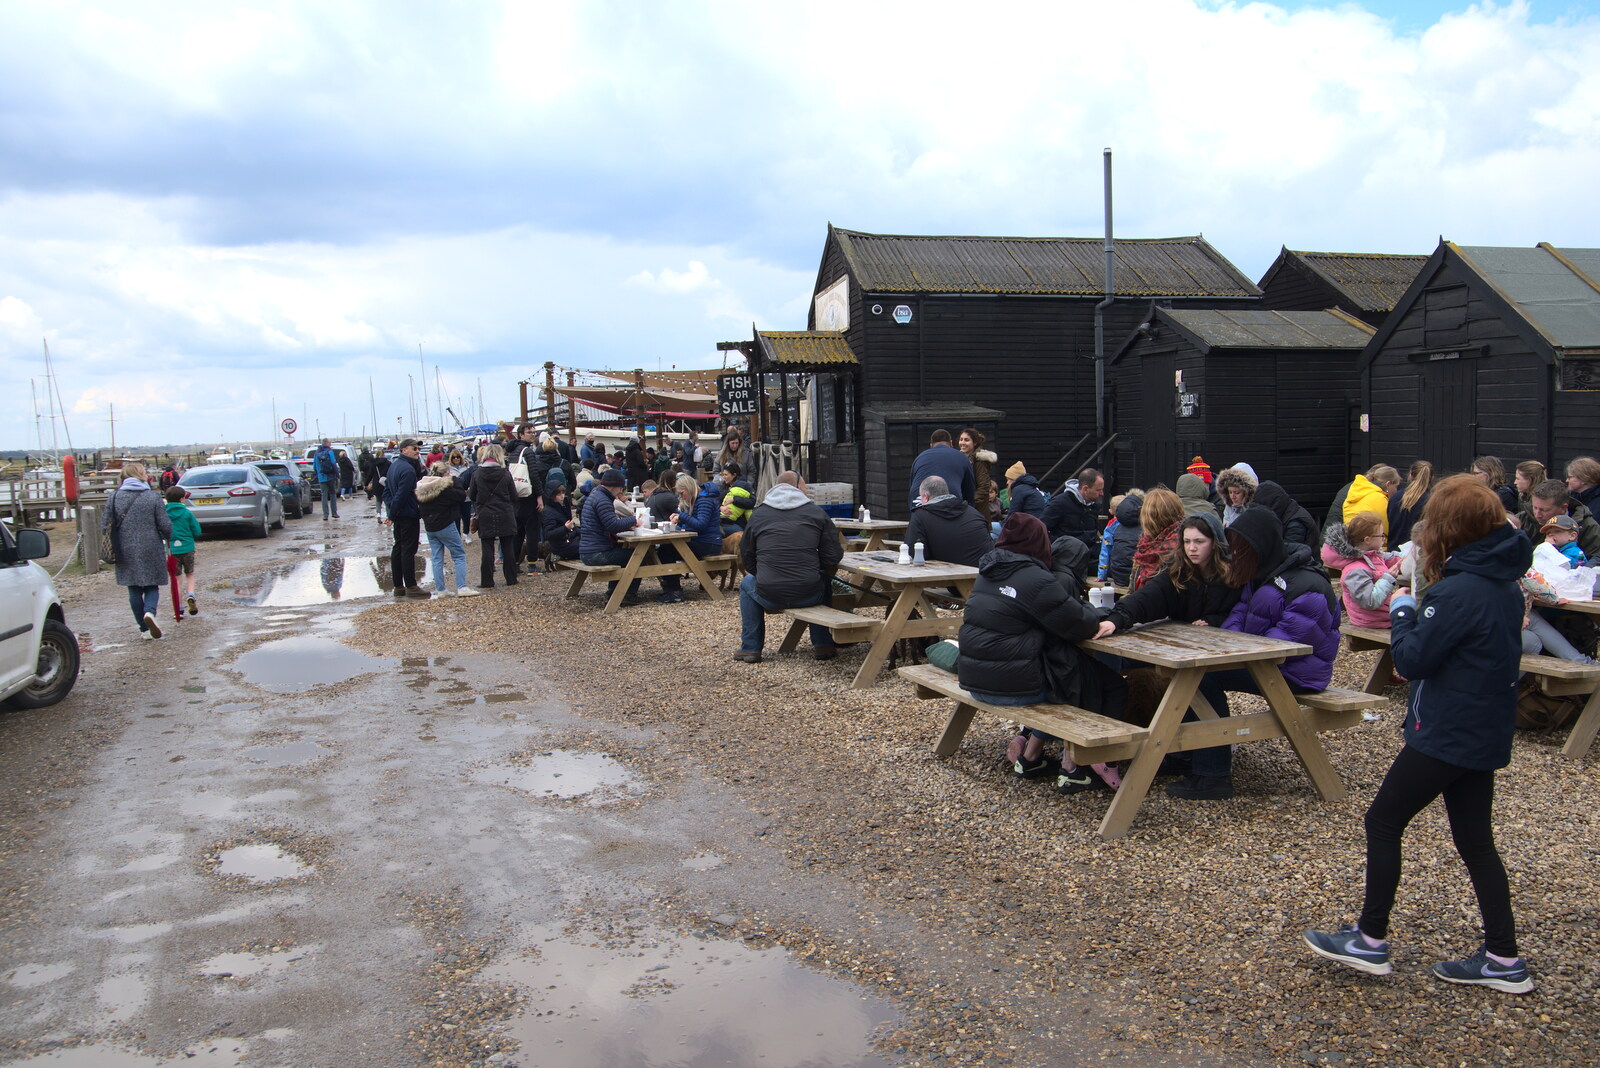 It's heaving by the fish shops on Blackshore from A Chilly Trip to the Beach, Southwold Harbour, Suffolk - 2nd May 2021